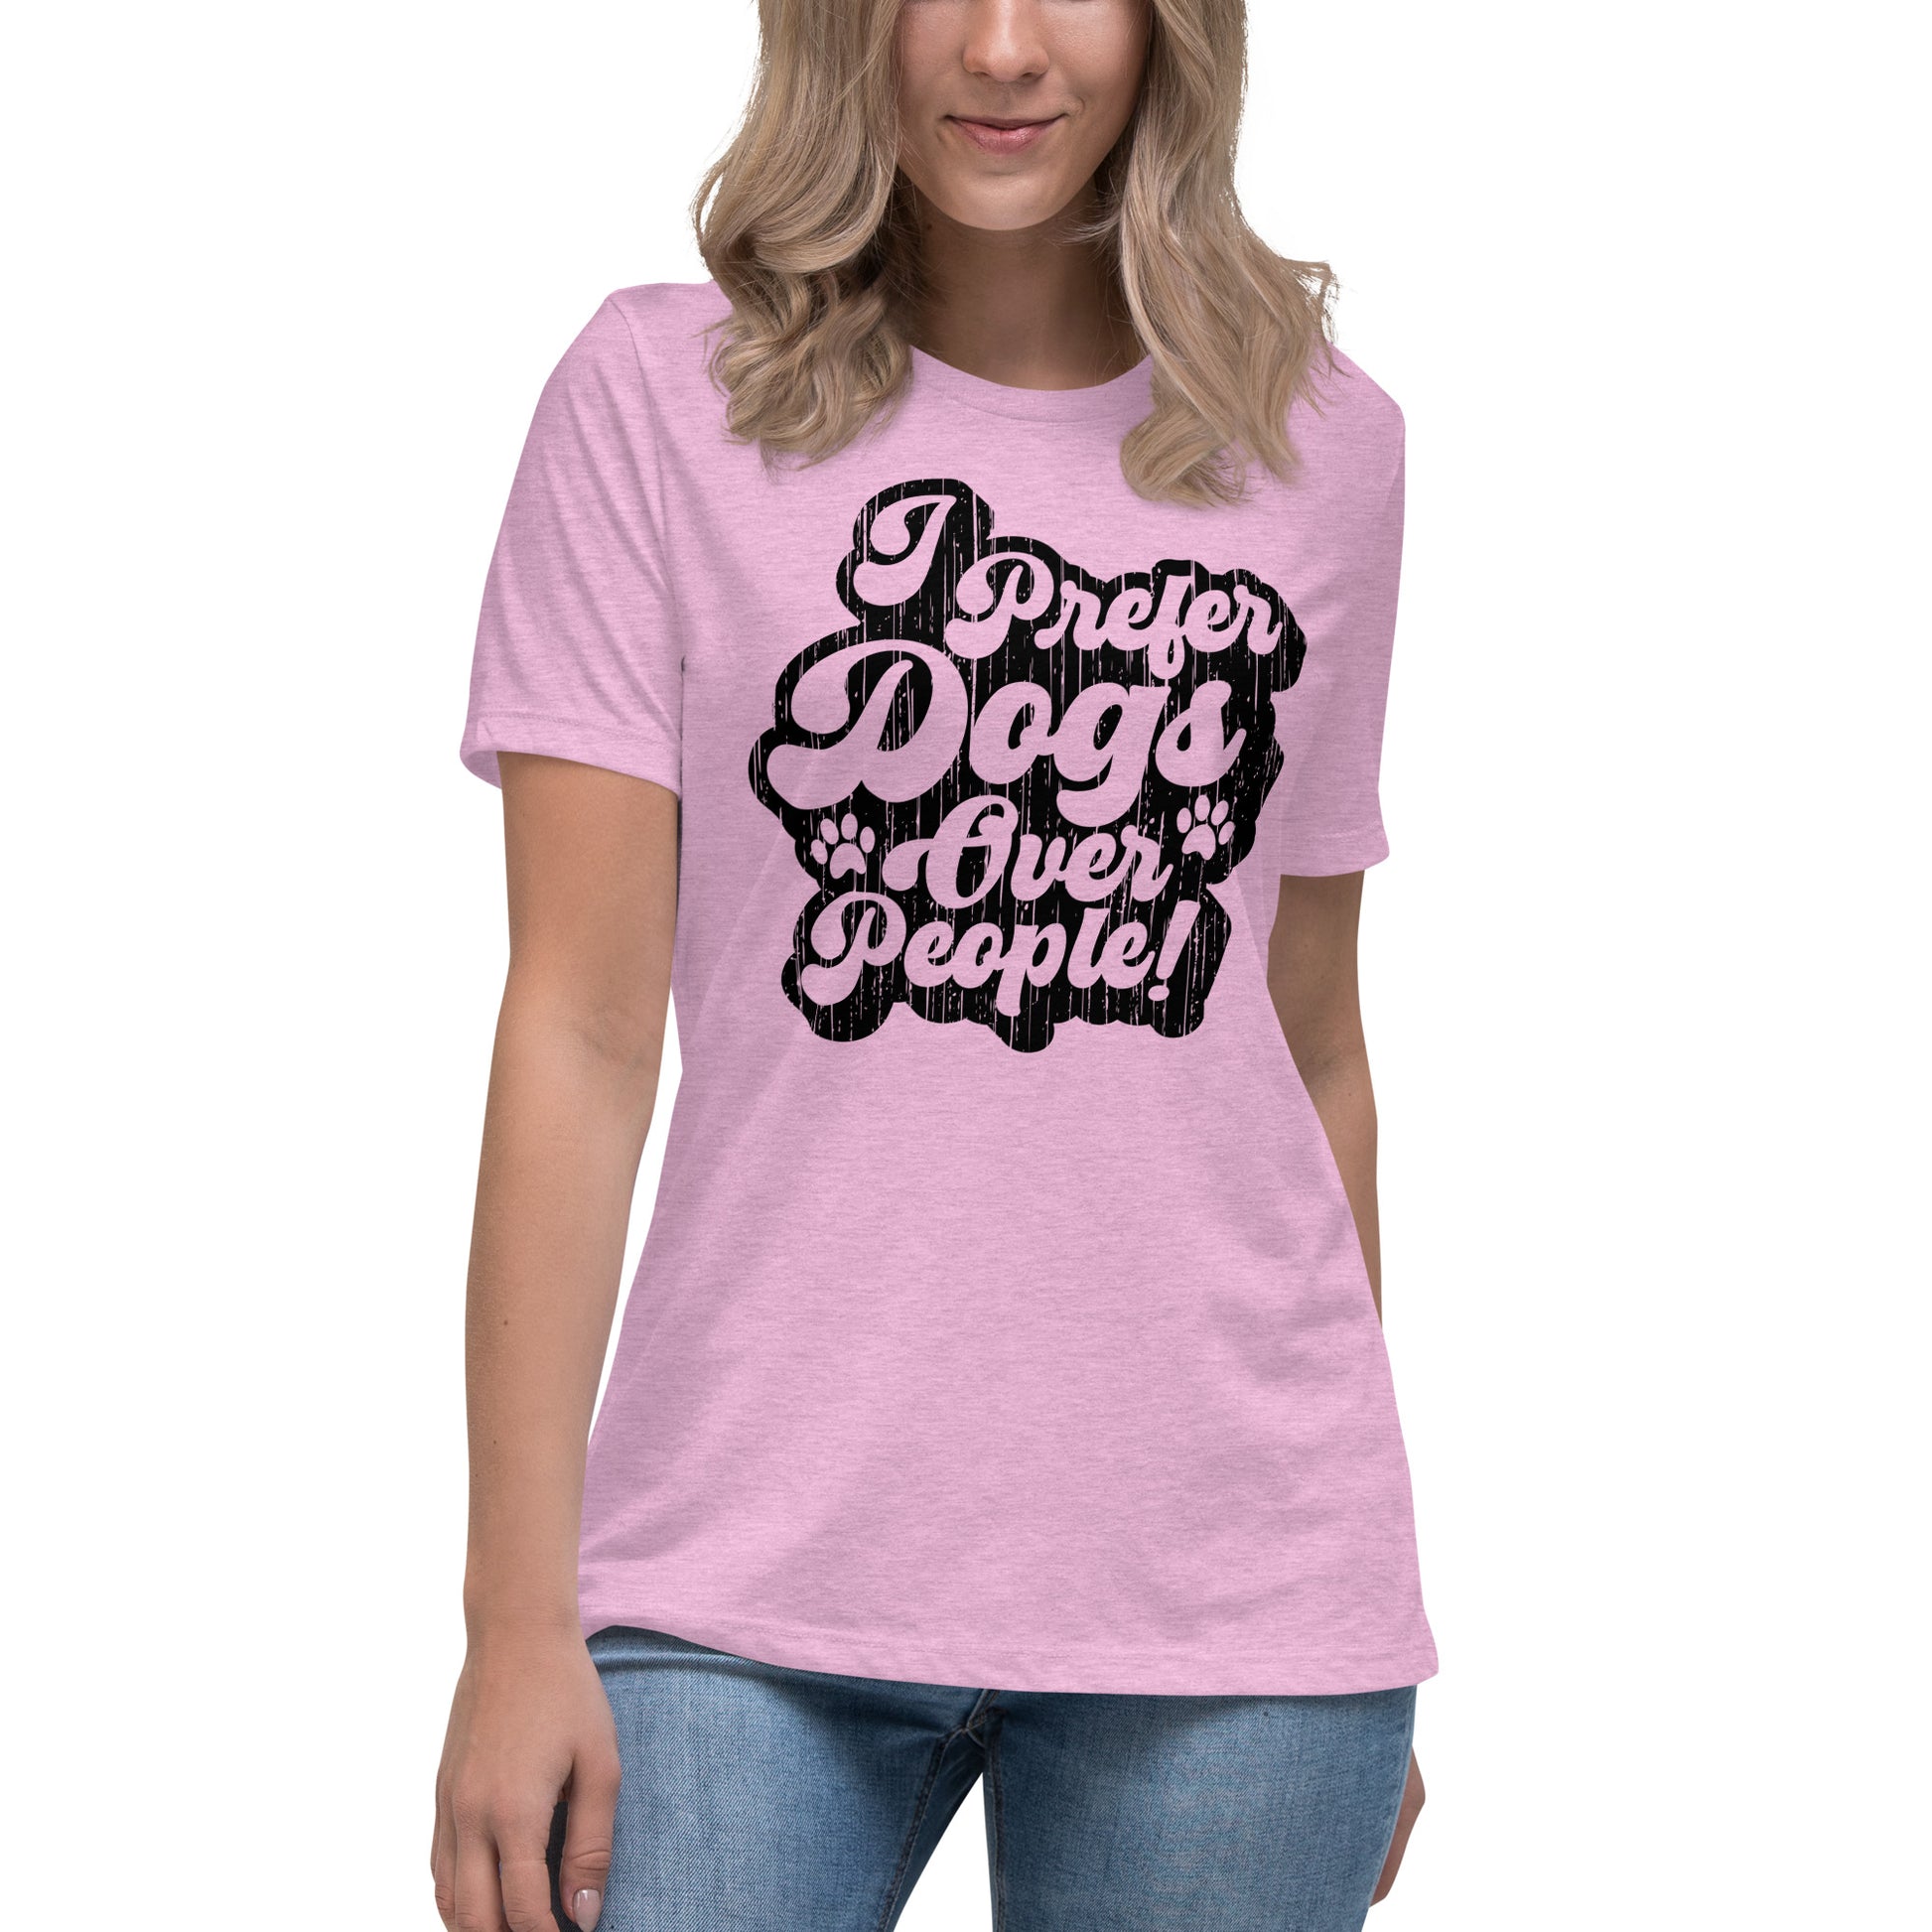 I prefer dogs over people women’s relaxed fit t-shirts by Dog Artistry heather prism lilac color